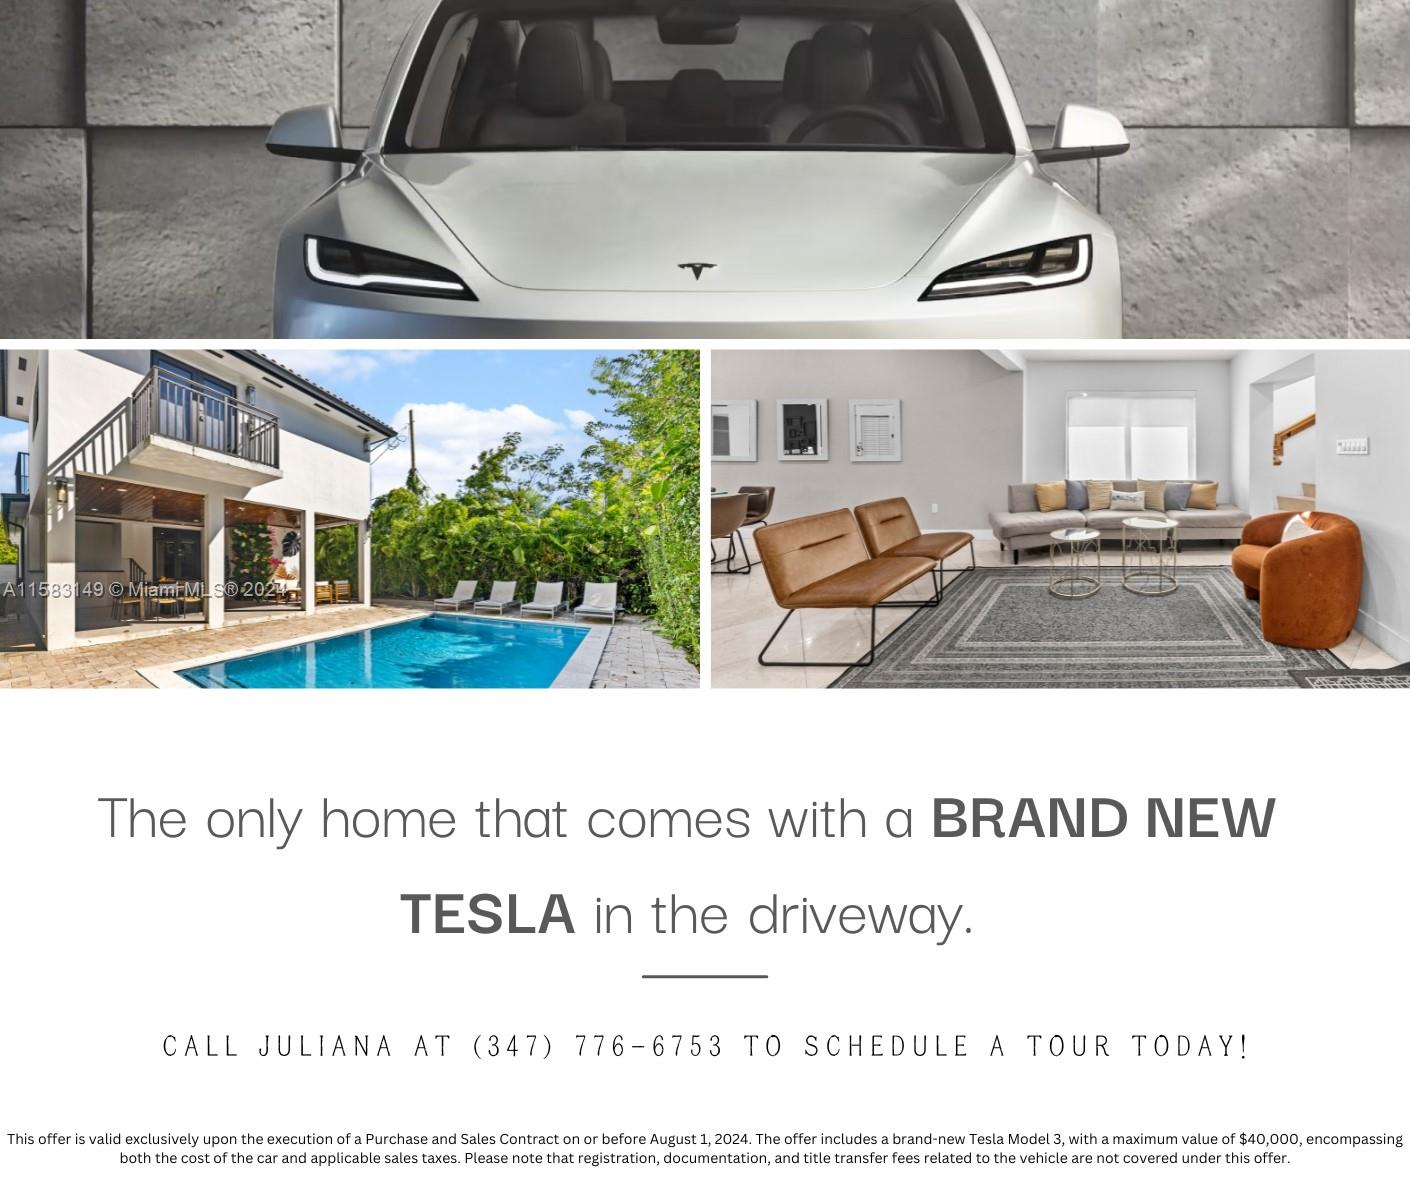 Move-in to a beautiful and modern completely remodeled inside out house that comes with a BRAND NEW TESLA 3 and the electric charger already installed for you*. This promotion is for offers accepted and executed before August 1st, 2024. This very well located house has 4beds/4 baths, a pool and covered terrace. with 6750 sq ft lot, features an open layout floor plan, new plumbing, new electricity, all LED lights, new stainless steel professional appliances, modern bathrooms, marbles floors, walking custom closets. Located at the exclusive and historic neighborhood of The Roads. Walking distance from Brickell, Key Biscayne and more.